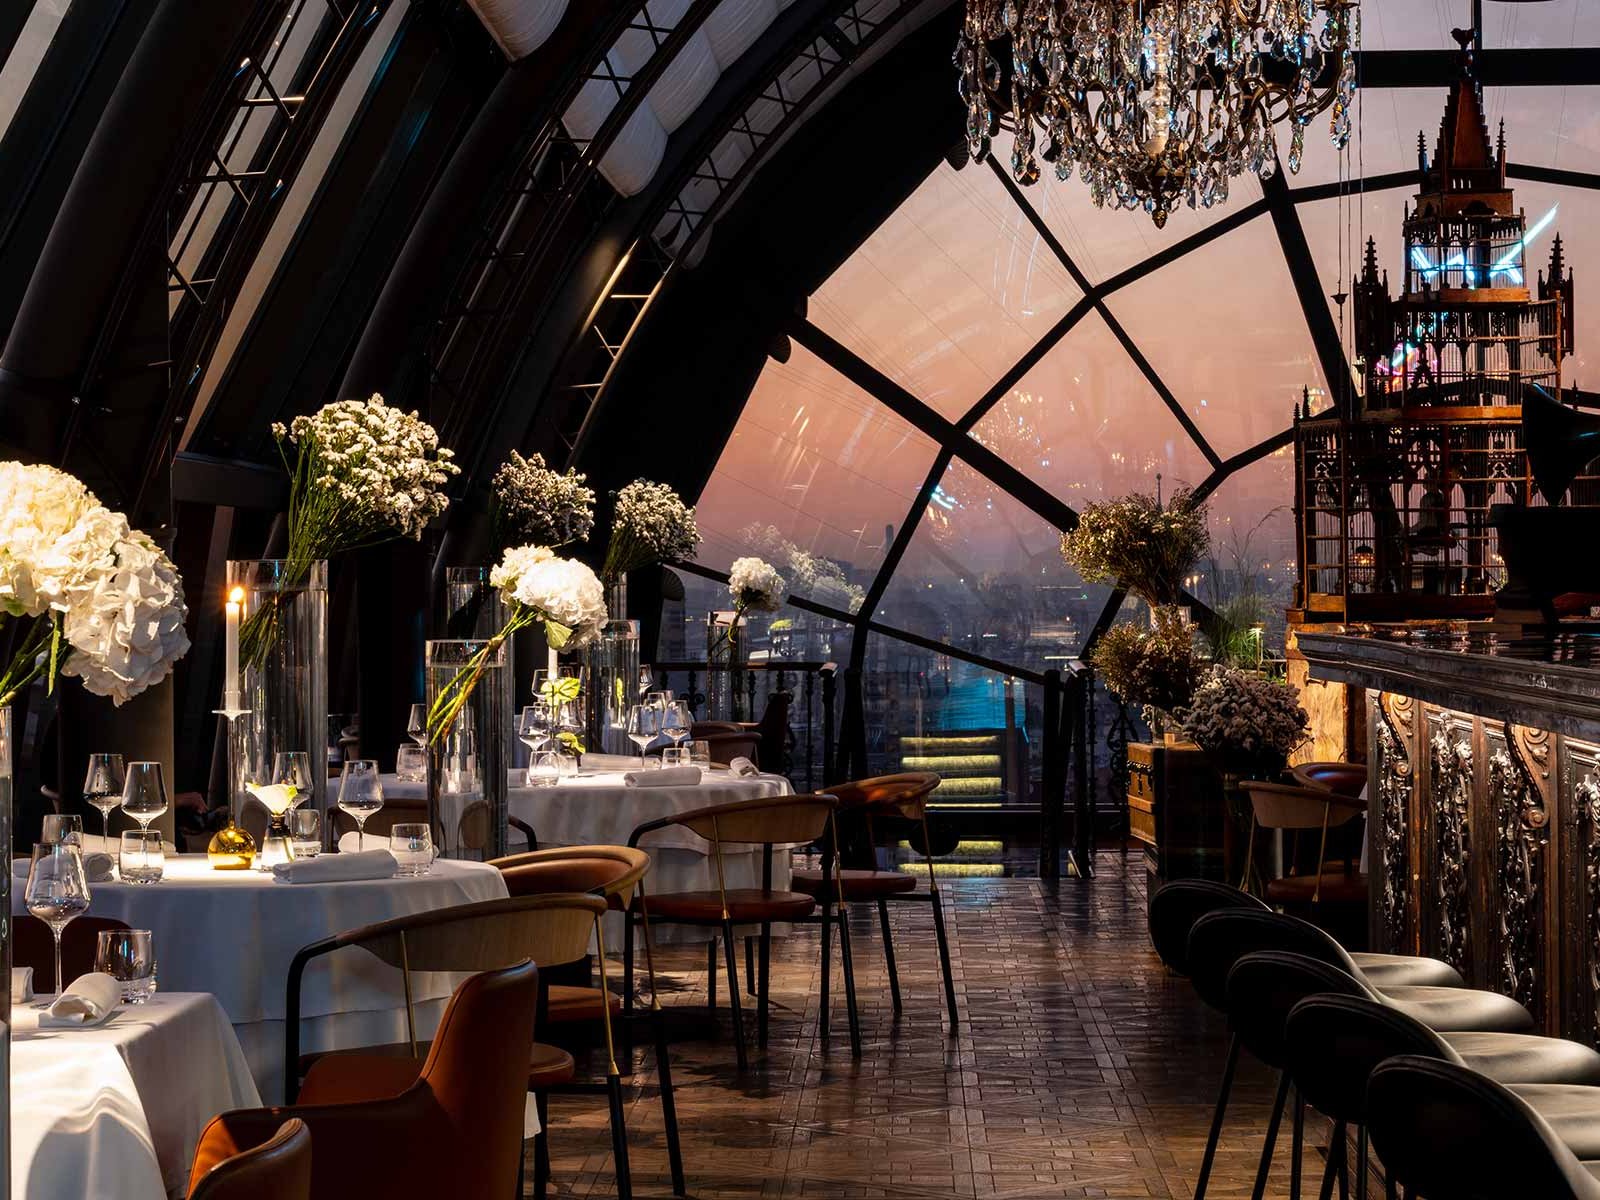 Excluded from The World's 50 Best Ranking 2022: The White Rabbit restaurant in Moscow.